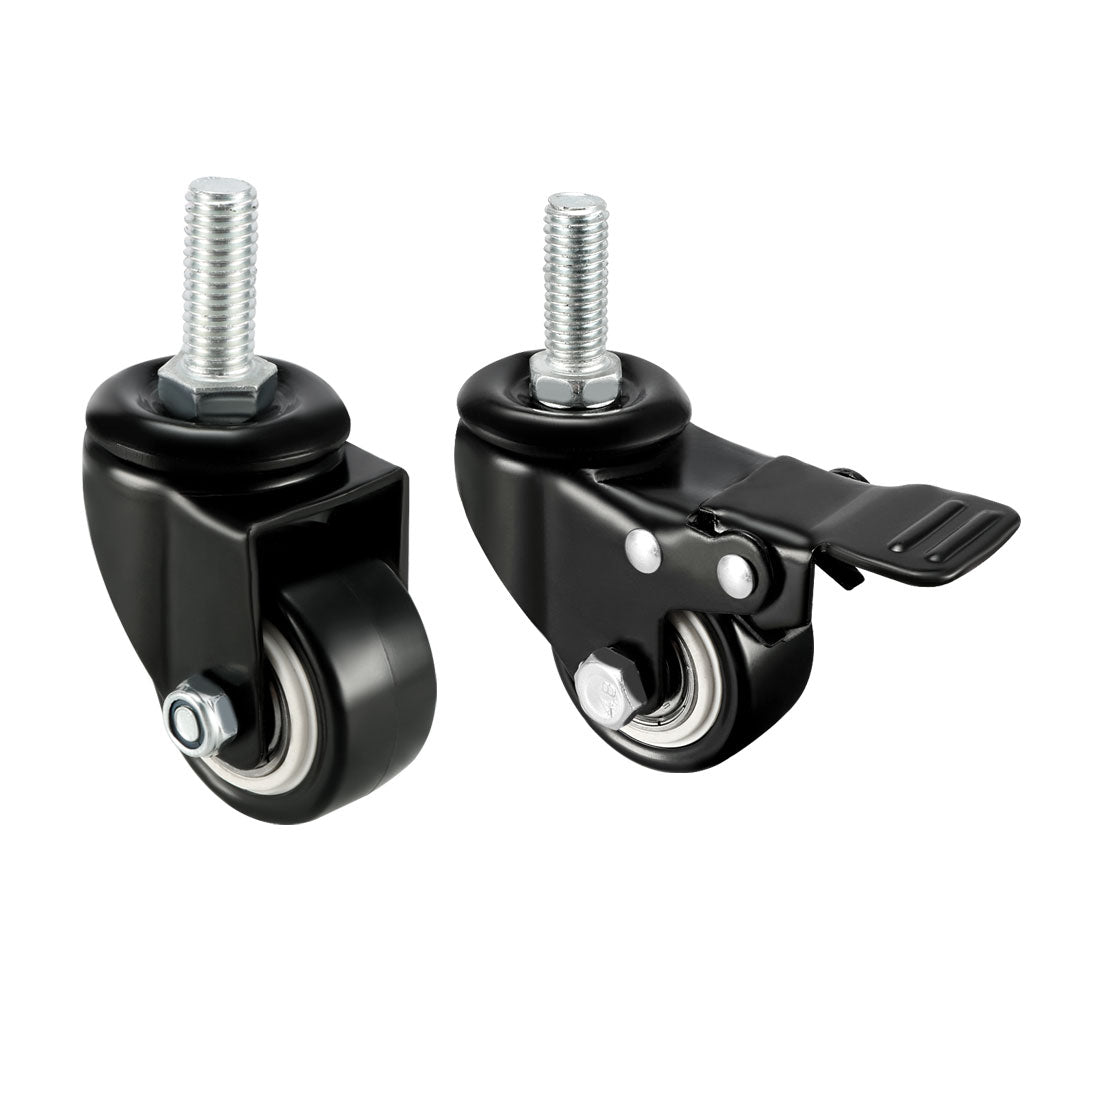 Uxcell Uxcell Swivel Fixed Casters 1.5 Inch PU M10 x 25mm Threaded Stem Caster Wheels, 110lb Capacity Each, 4 Pcs (2 Pcs Swivel, 2 Pcs Fixed with Brake)